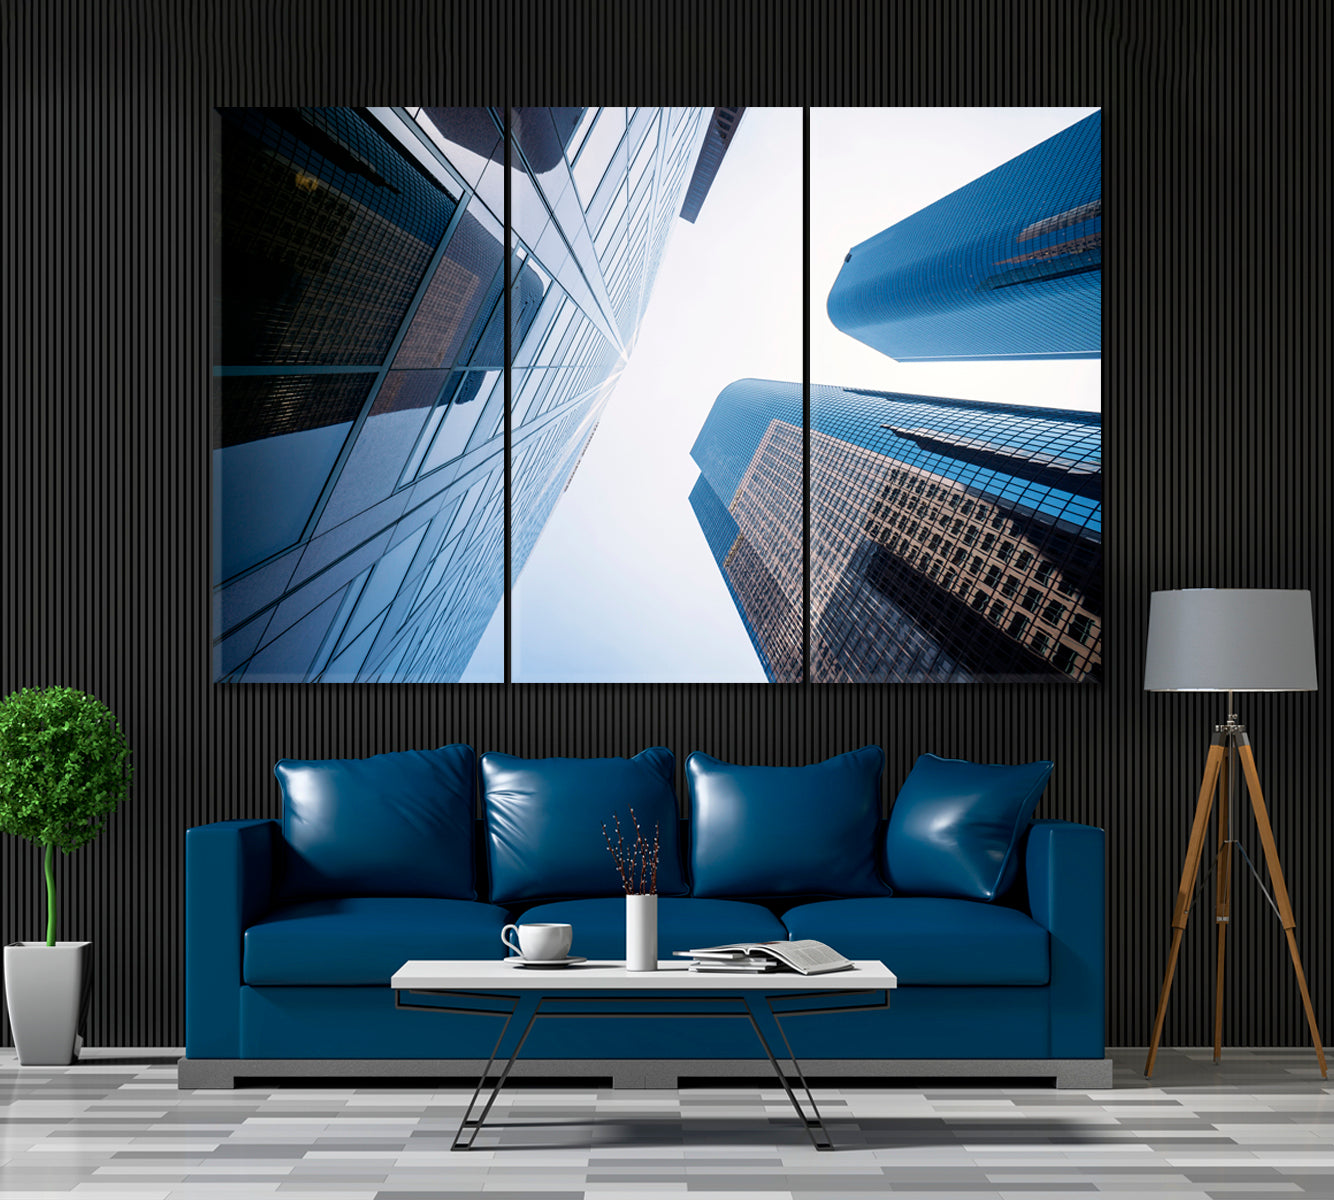 Los Angeles Skyscrapers Canvas Print ArtLexy 3 Panels 36"x24" inches 